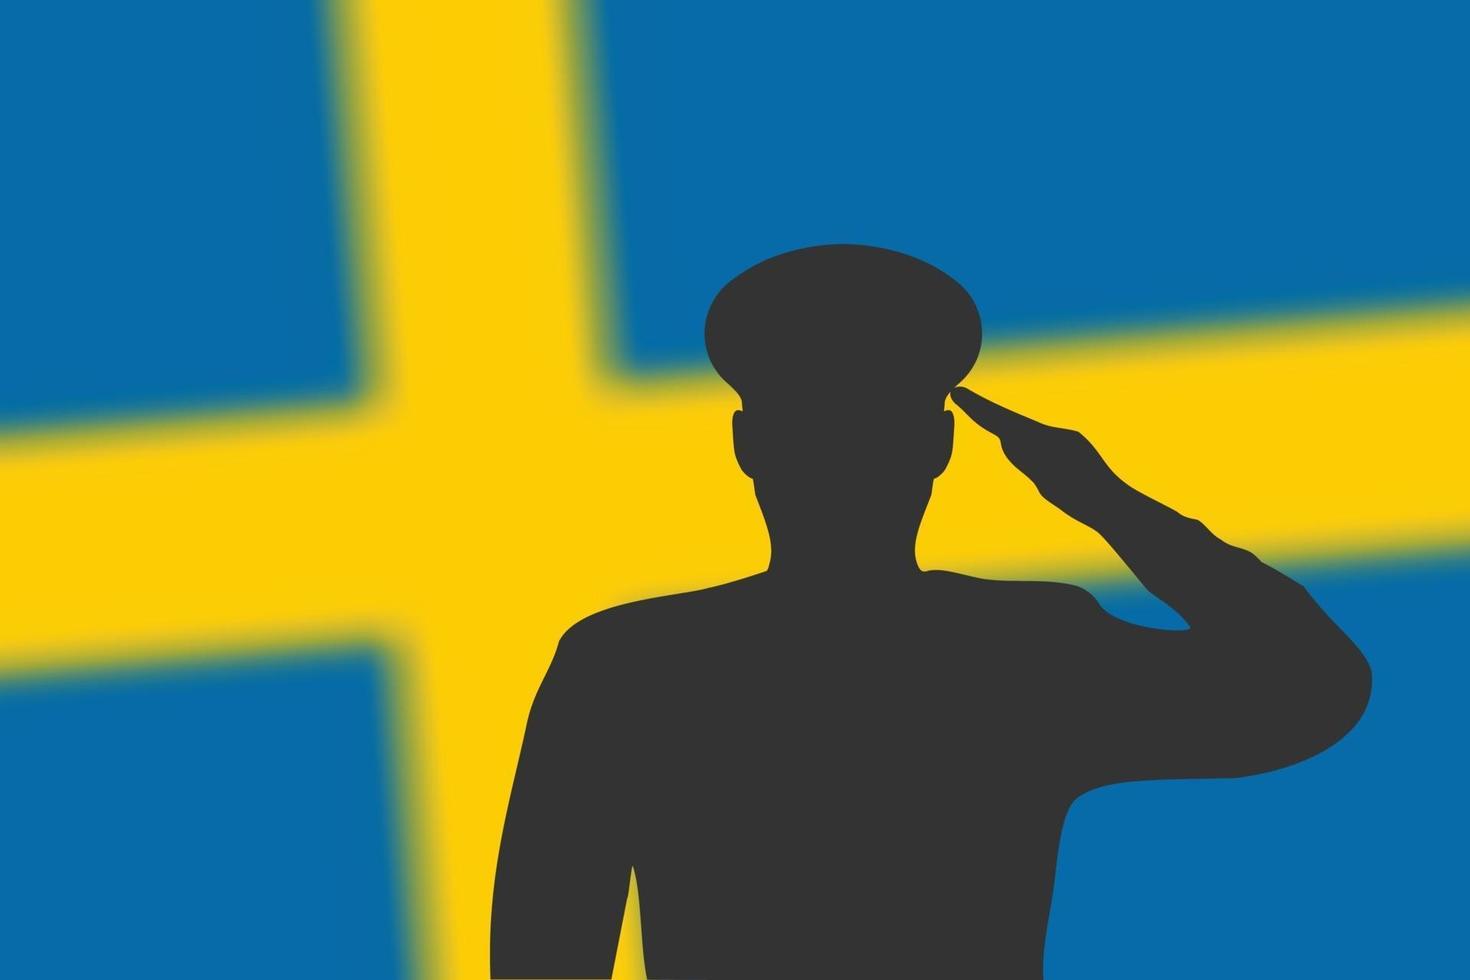 Solder silhouette on blur background with Sweden flag. vector